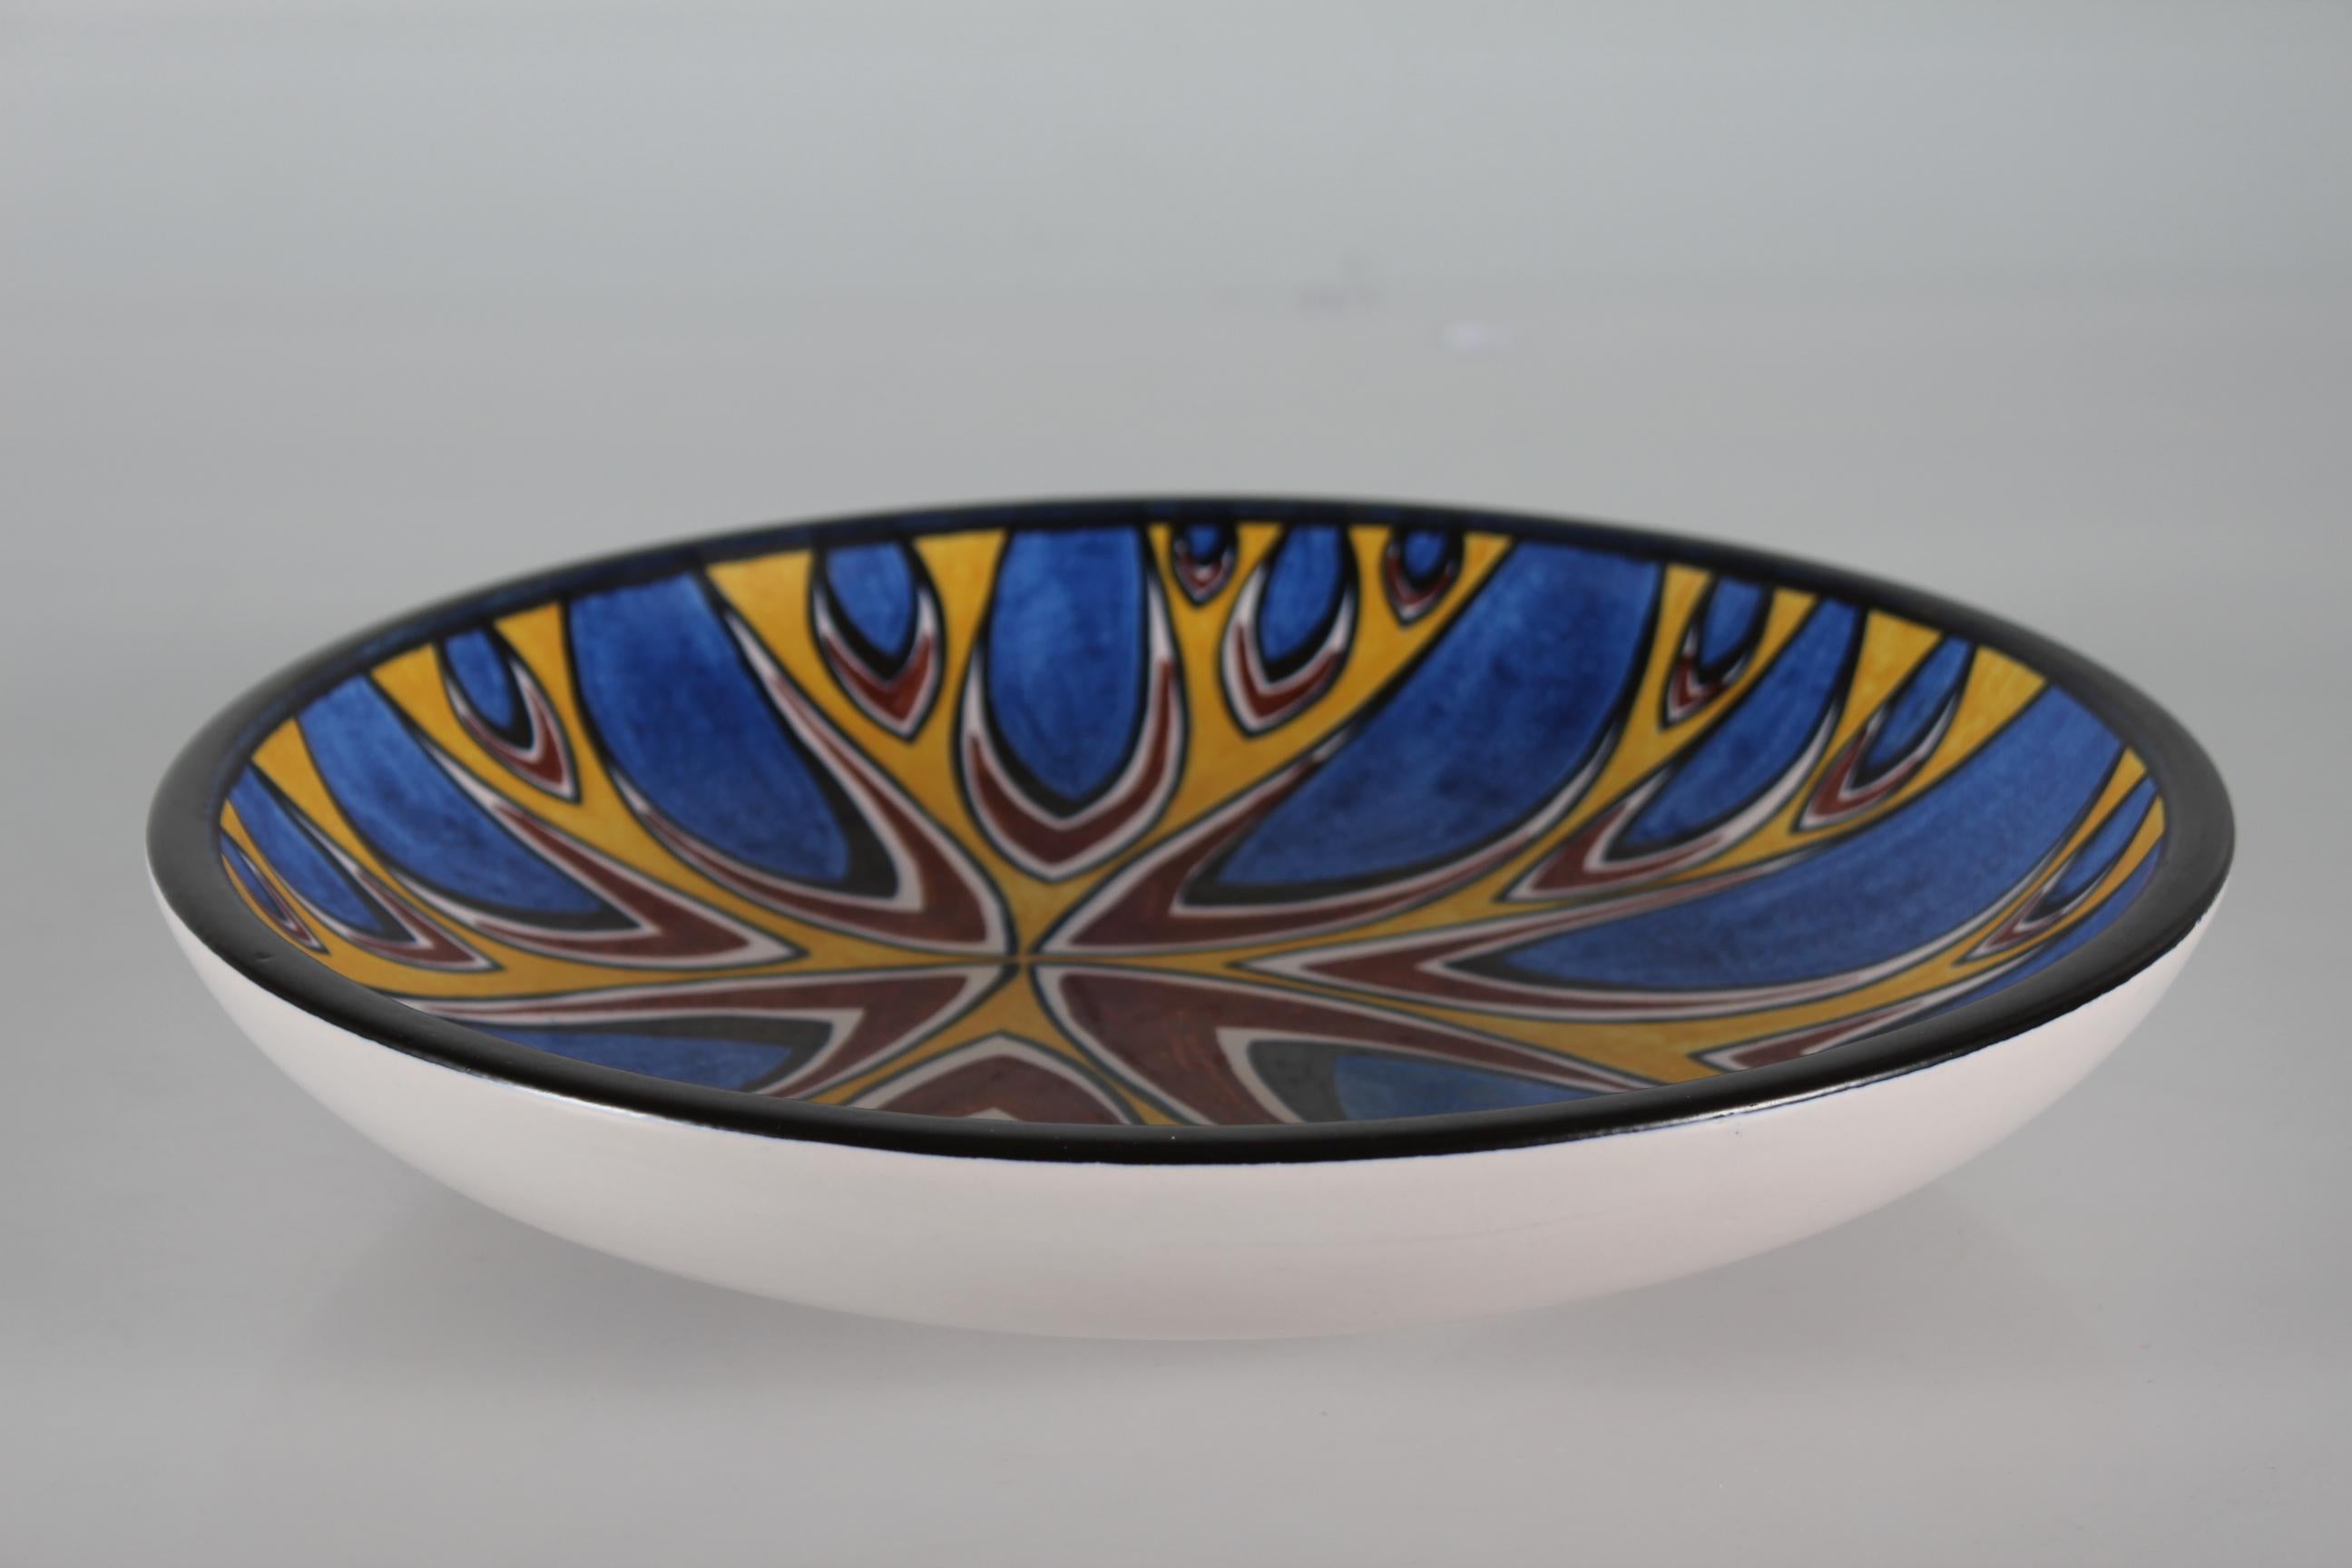 Large Søholm Ceramic Low Bowl with Graphic Pattern in Bright Colors, 1960s For Sale 2